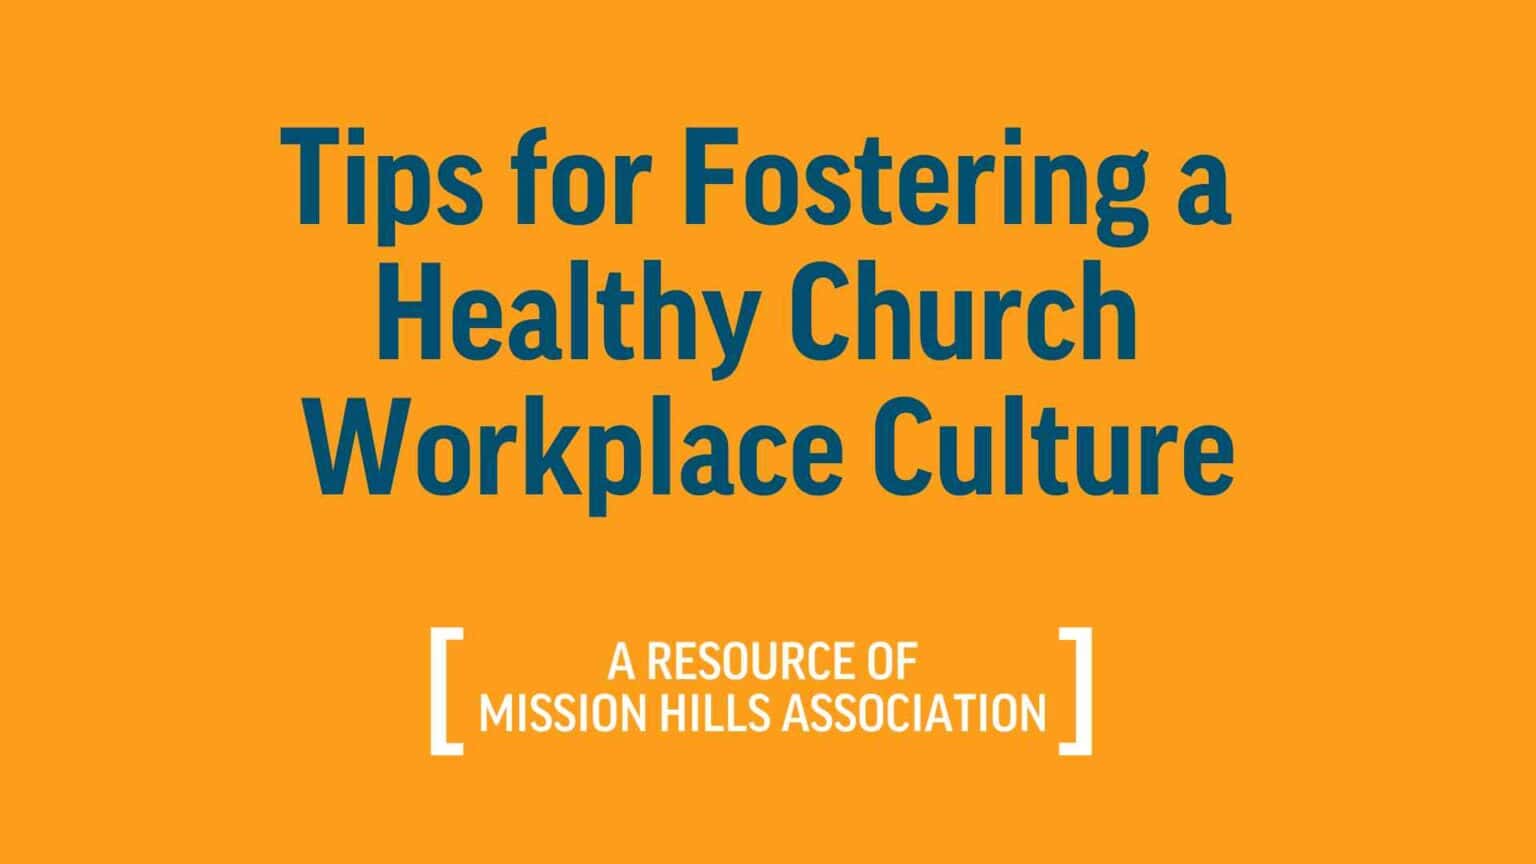 Tips for Fostering a Healthy Church Workplace Culture